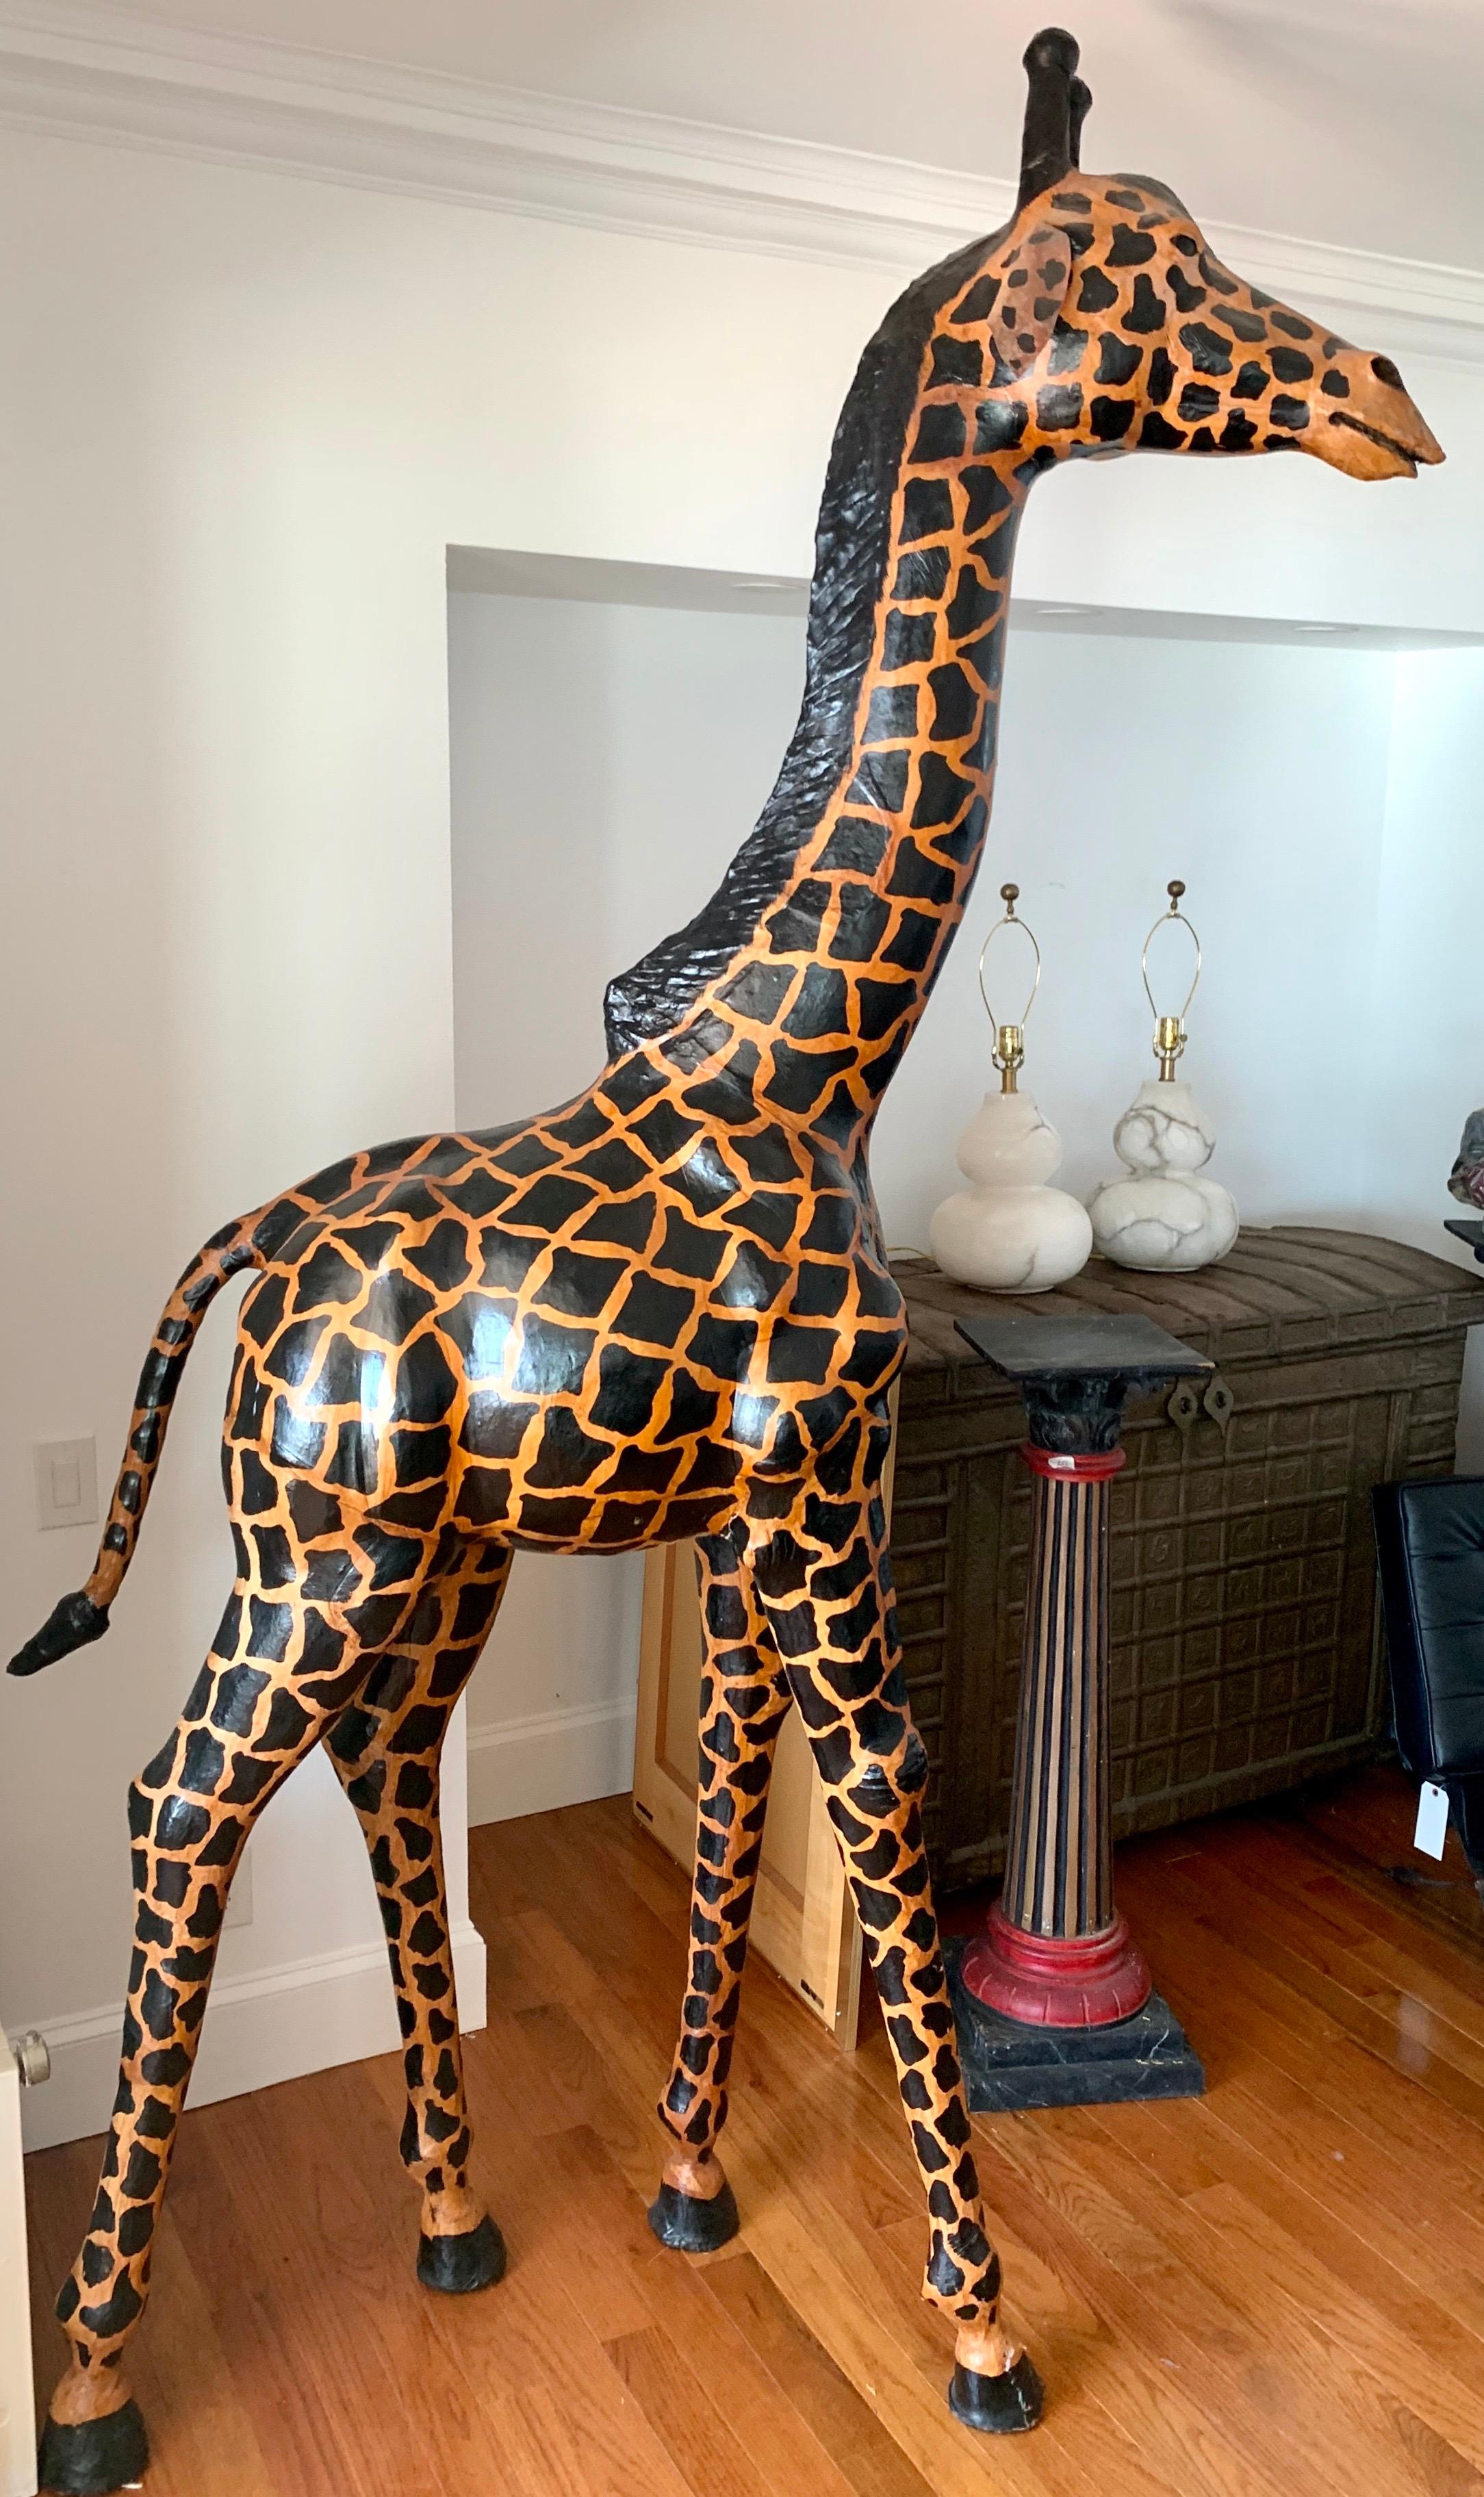 Large Life-Size Leather Giraffe Sculpture Almost Nine Feet Tall 2